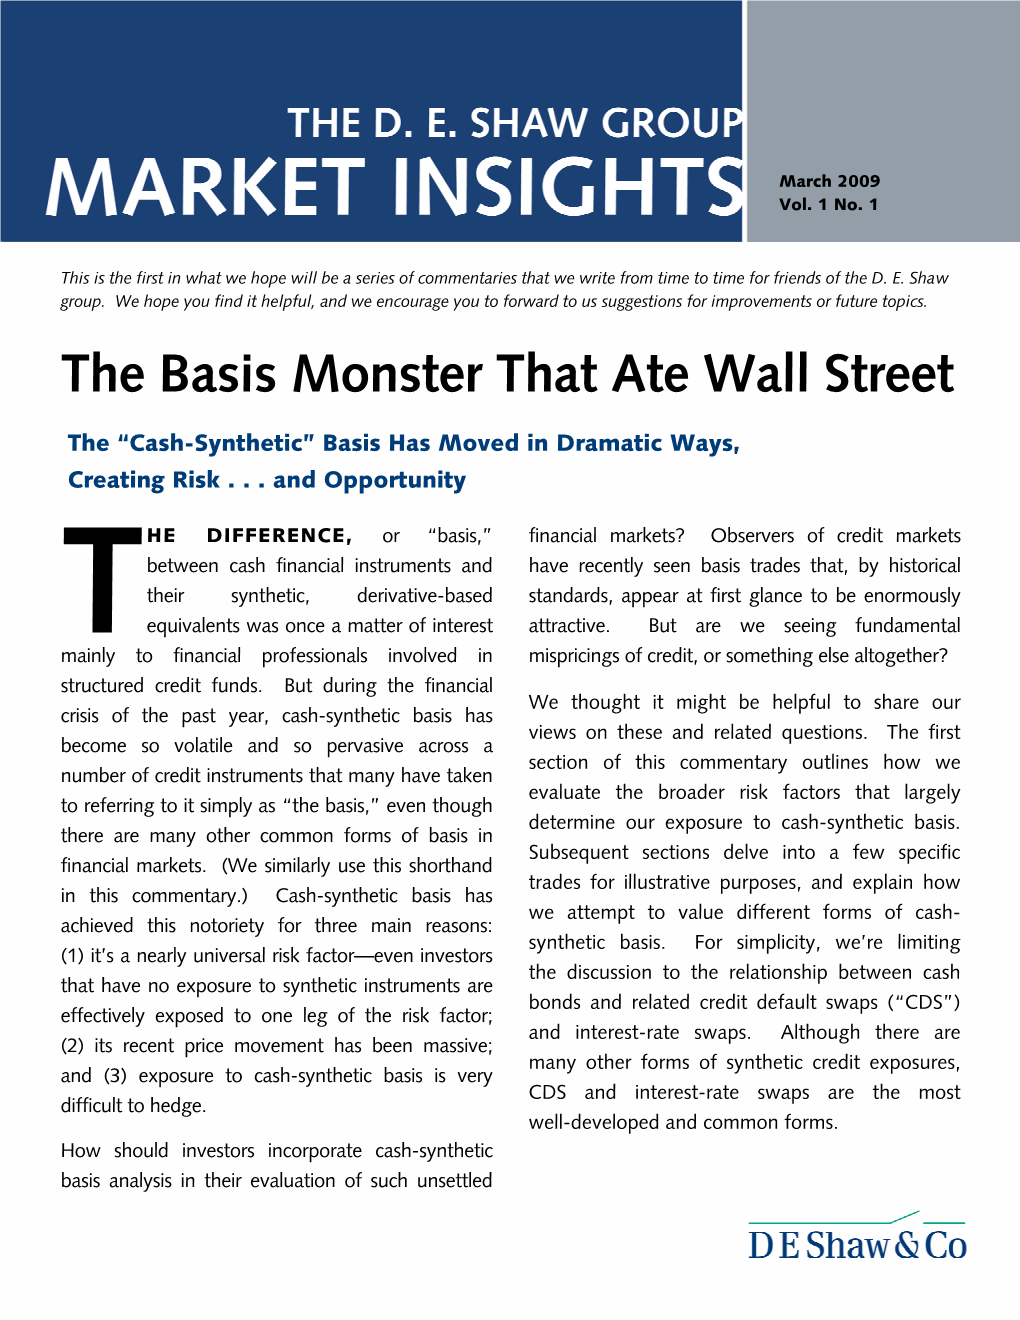 The Basis Monster That Ate Wall Street